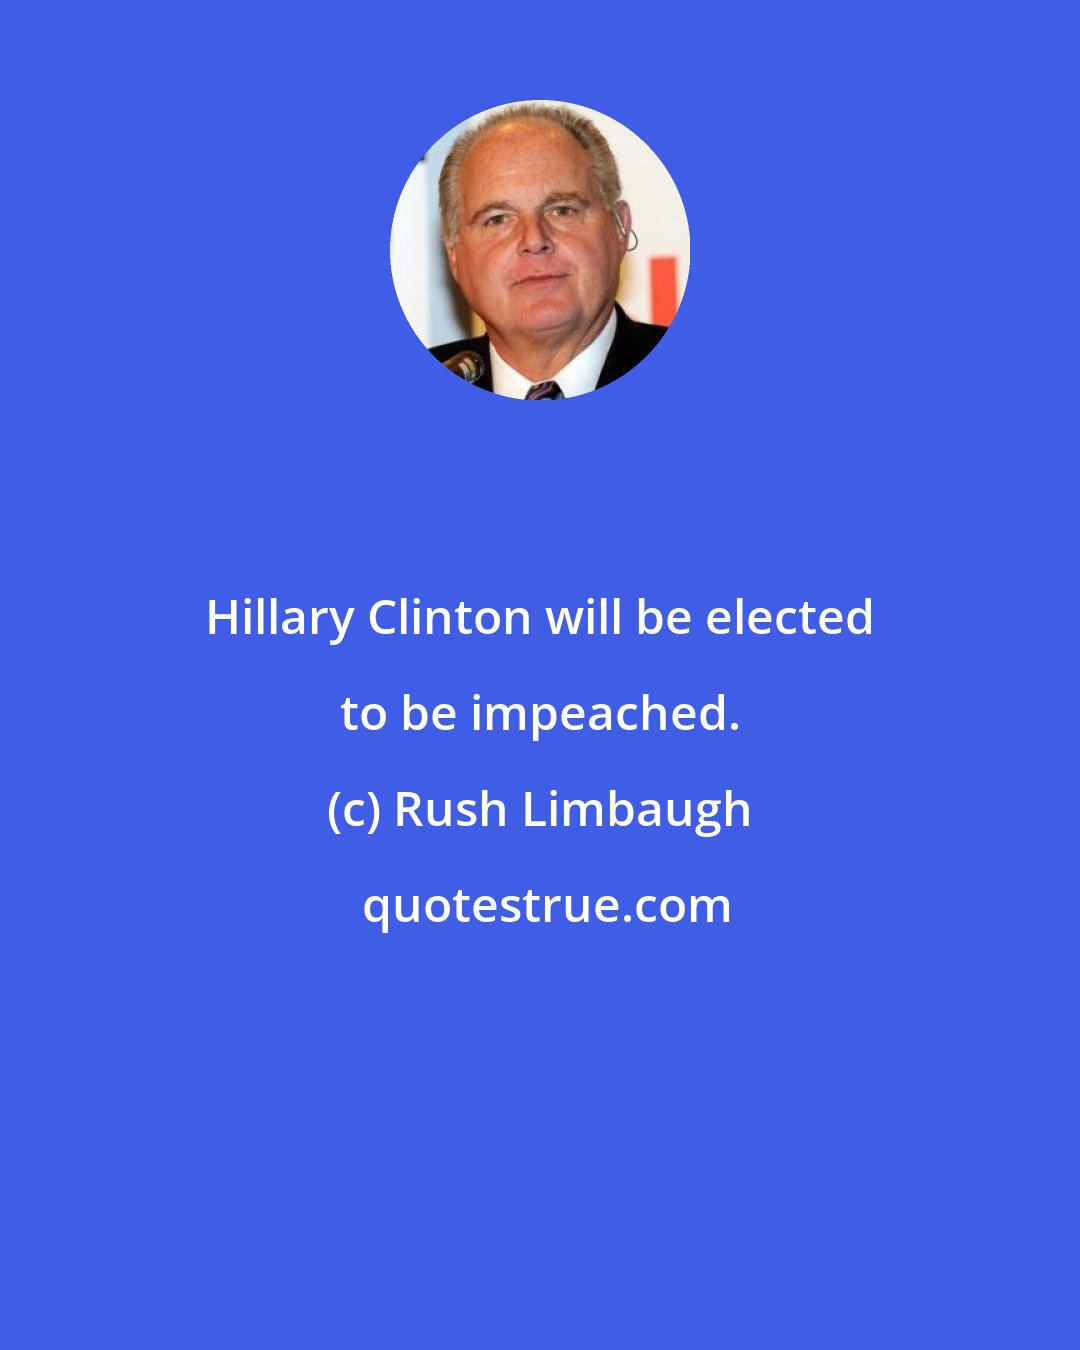 Rush Limbaugh: Hillary Clinton will be elected to be impeached.